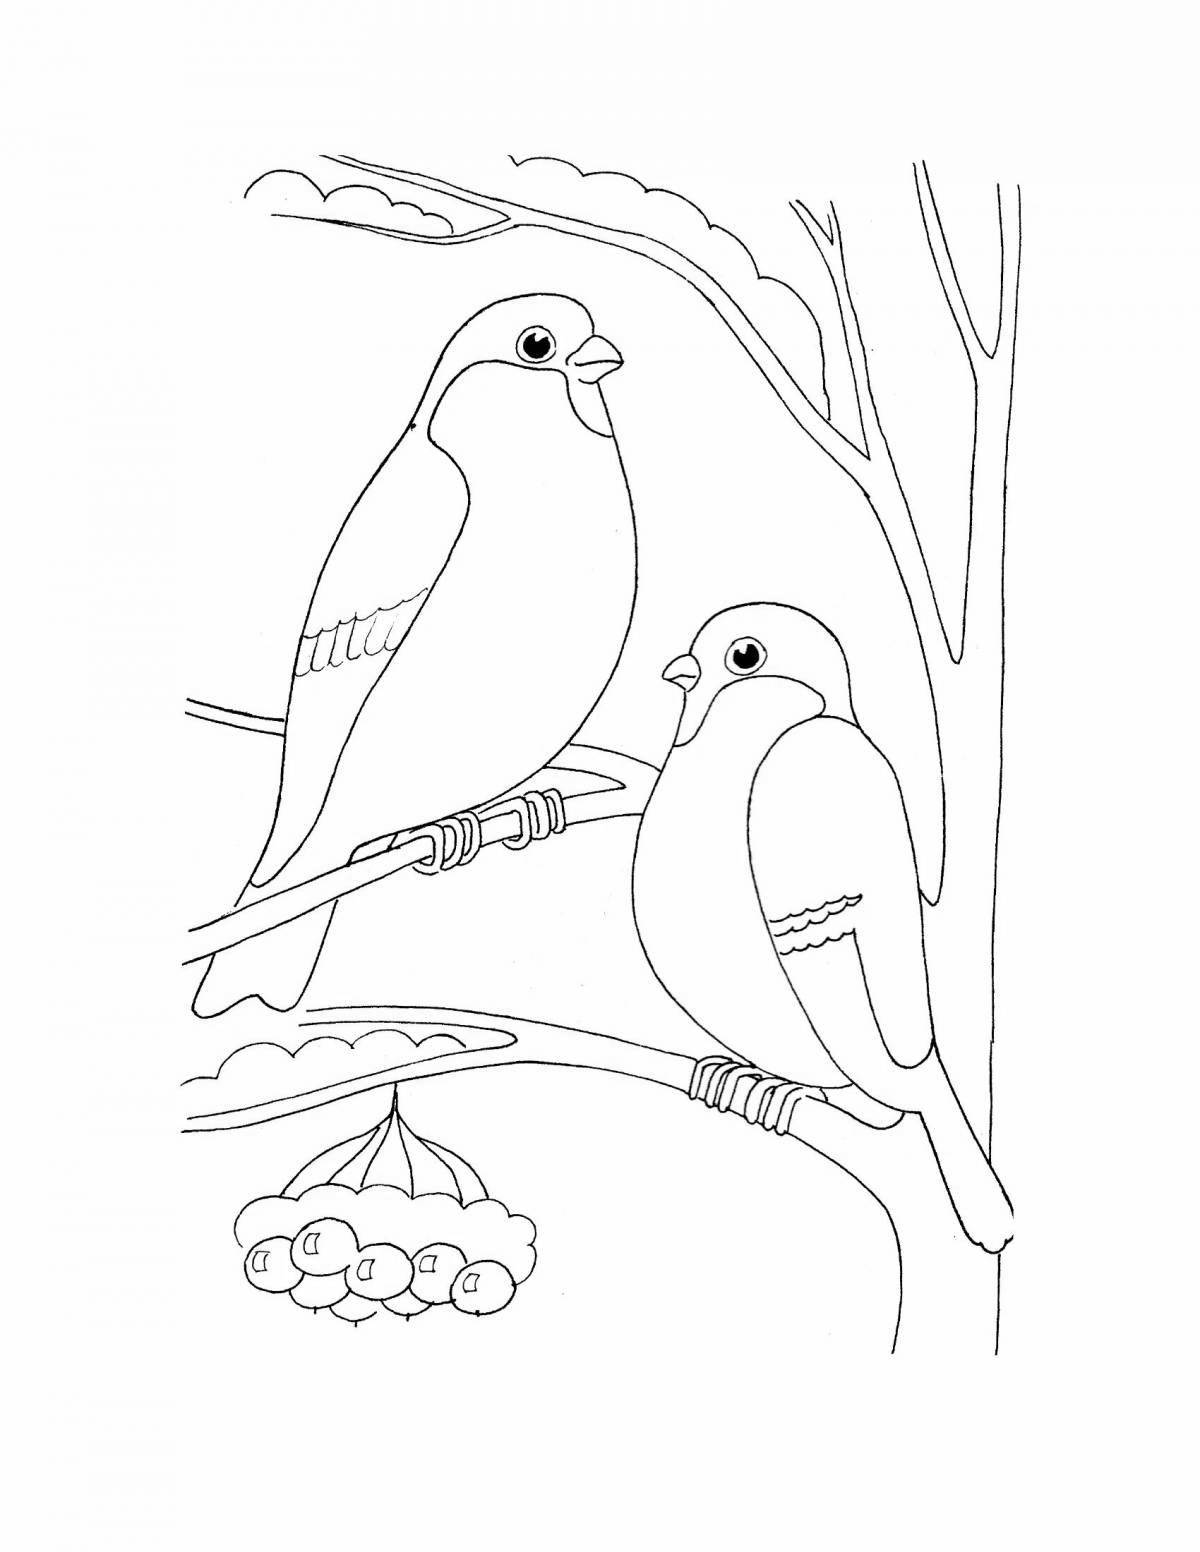 Fancy winter birds coloring book for 6-7 year olds